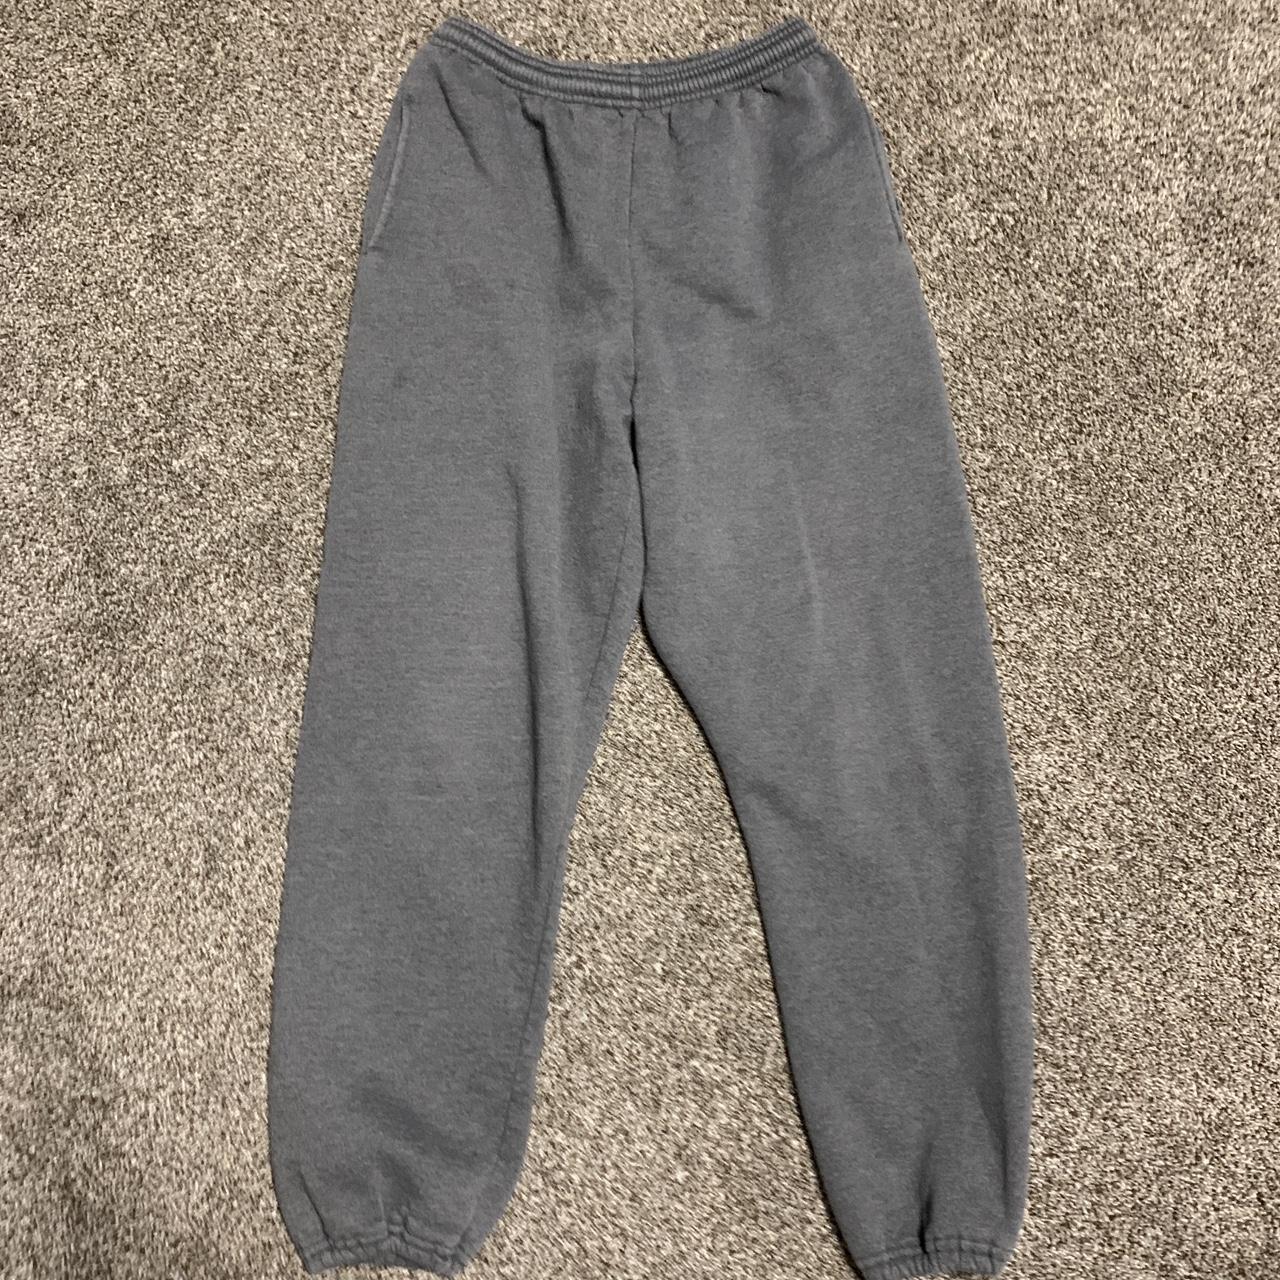 Vintage Russell gray sweatpants with very minor... - Depop